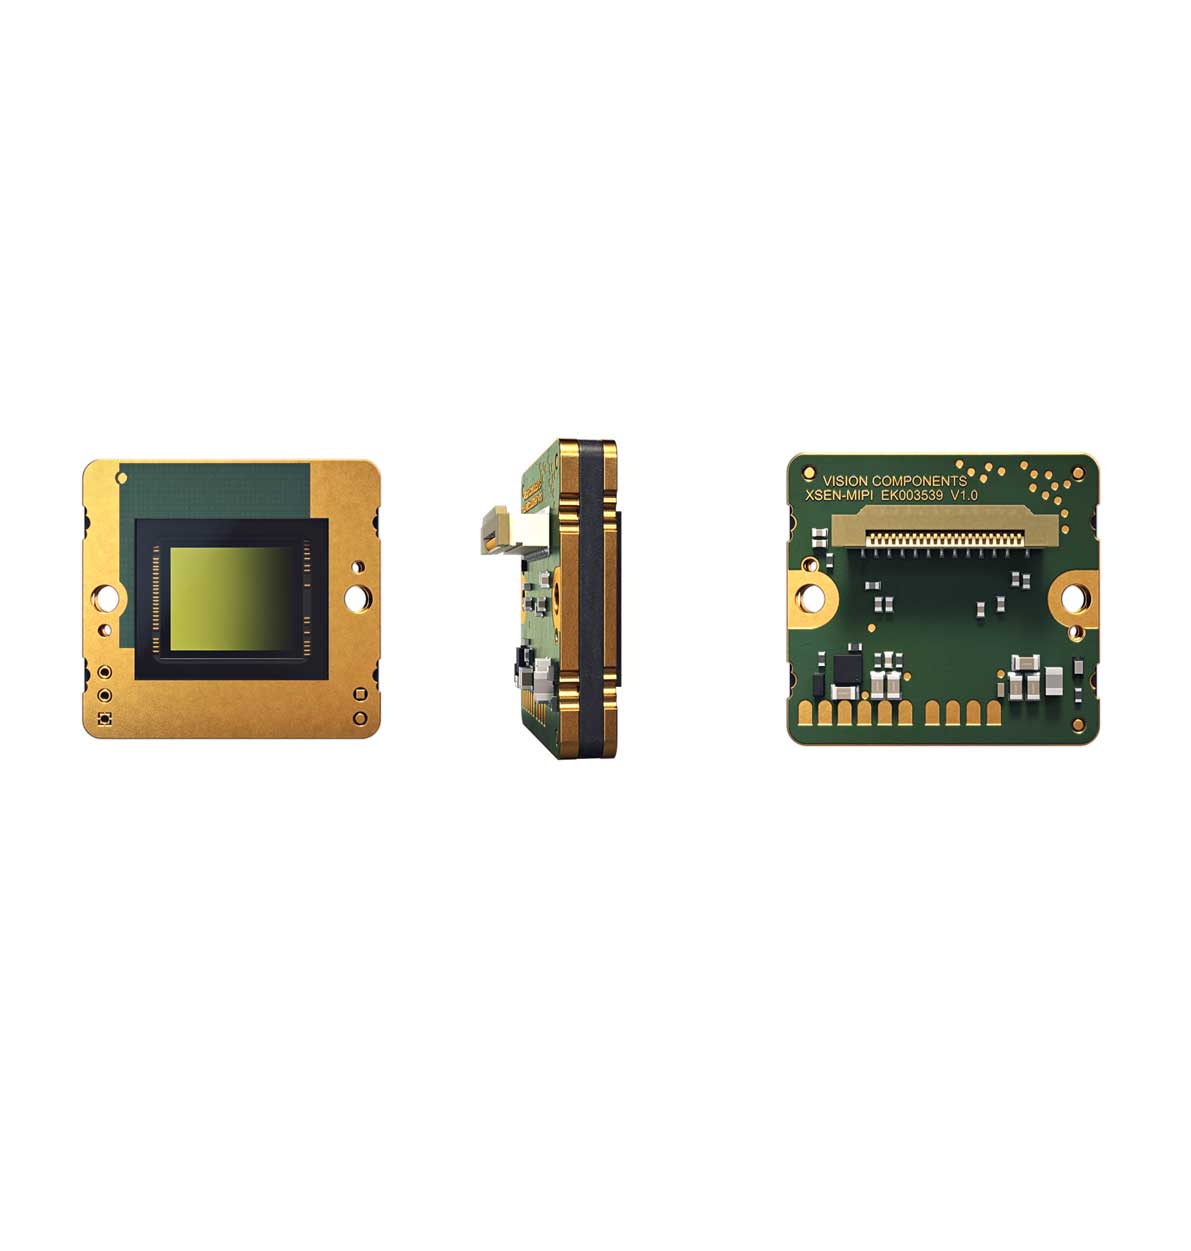 VC MIPI camera module front and back view